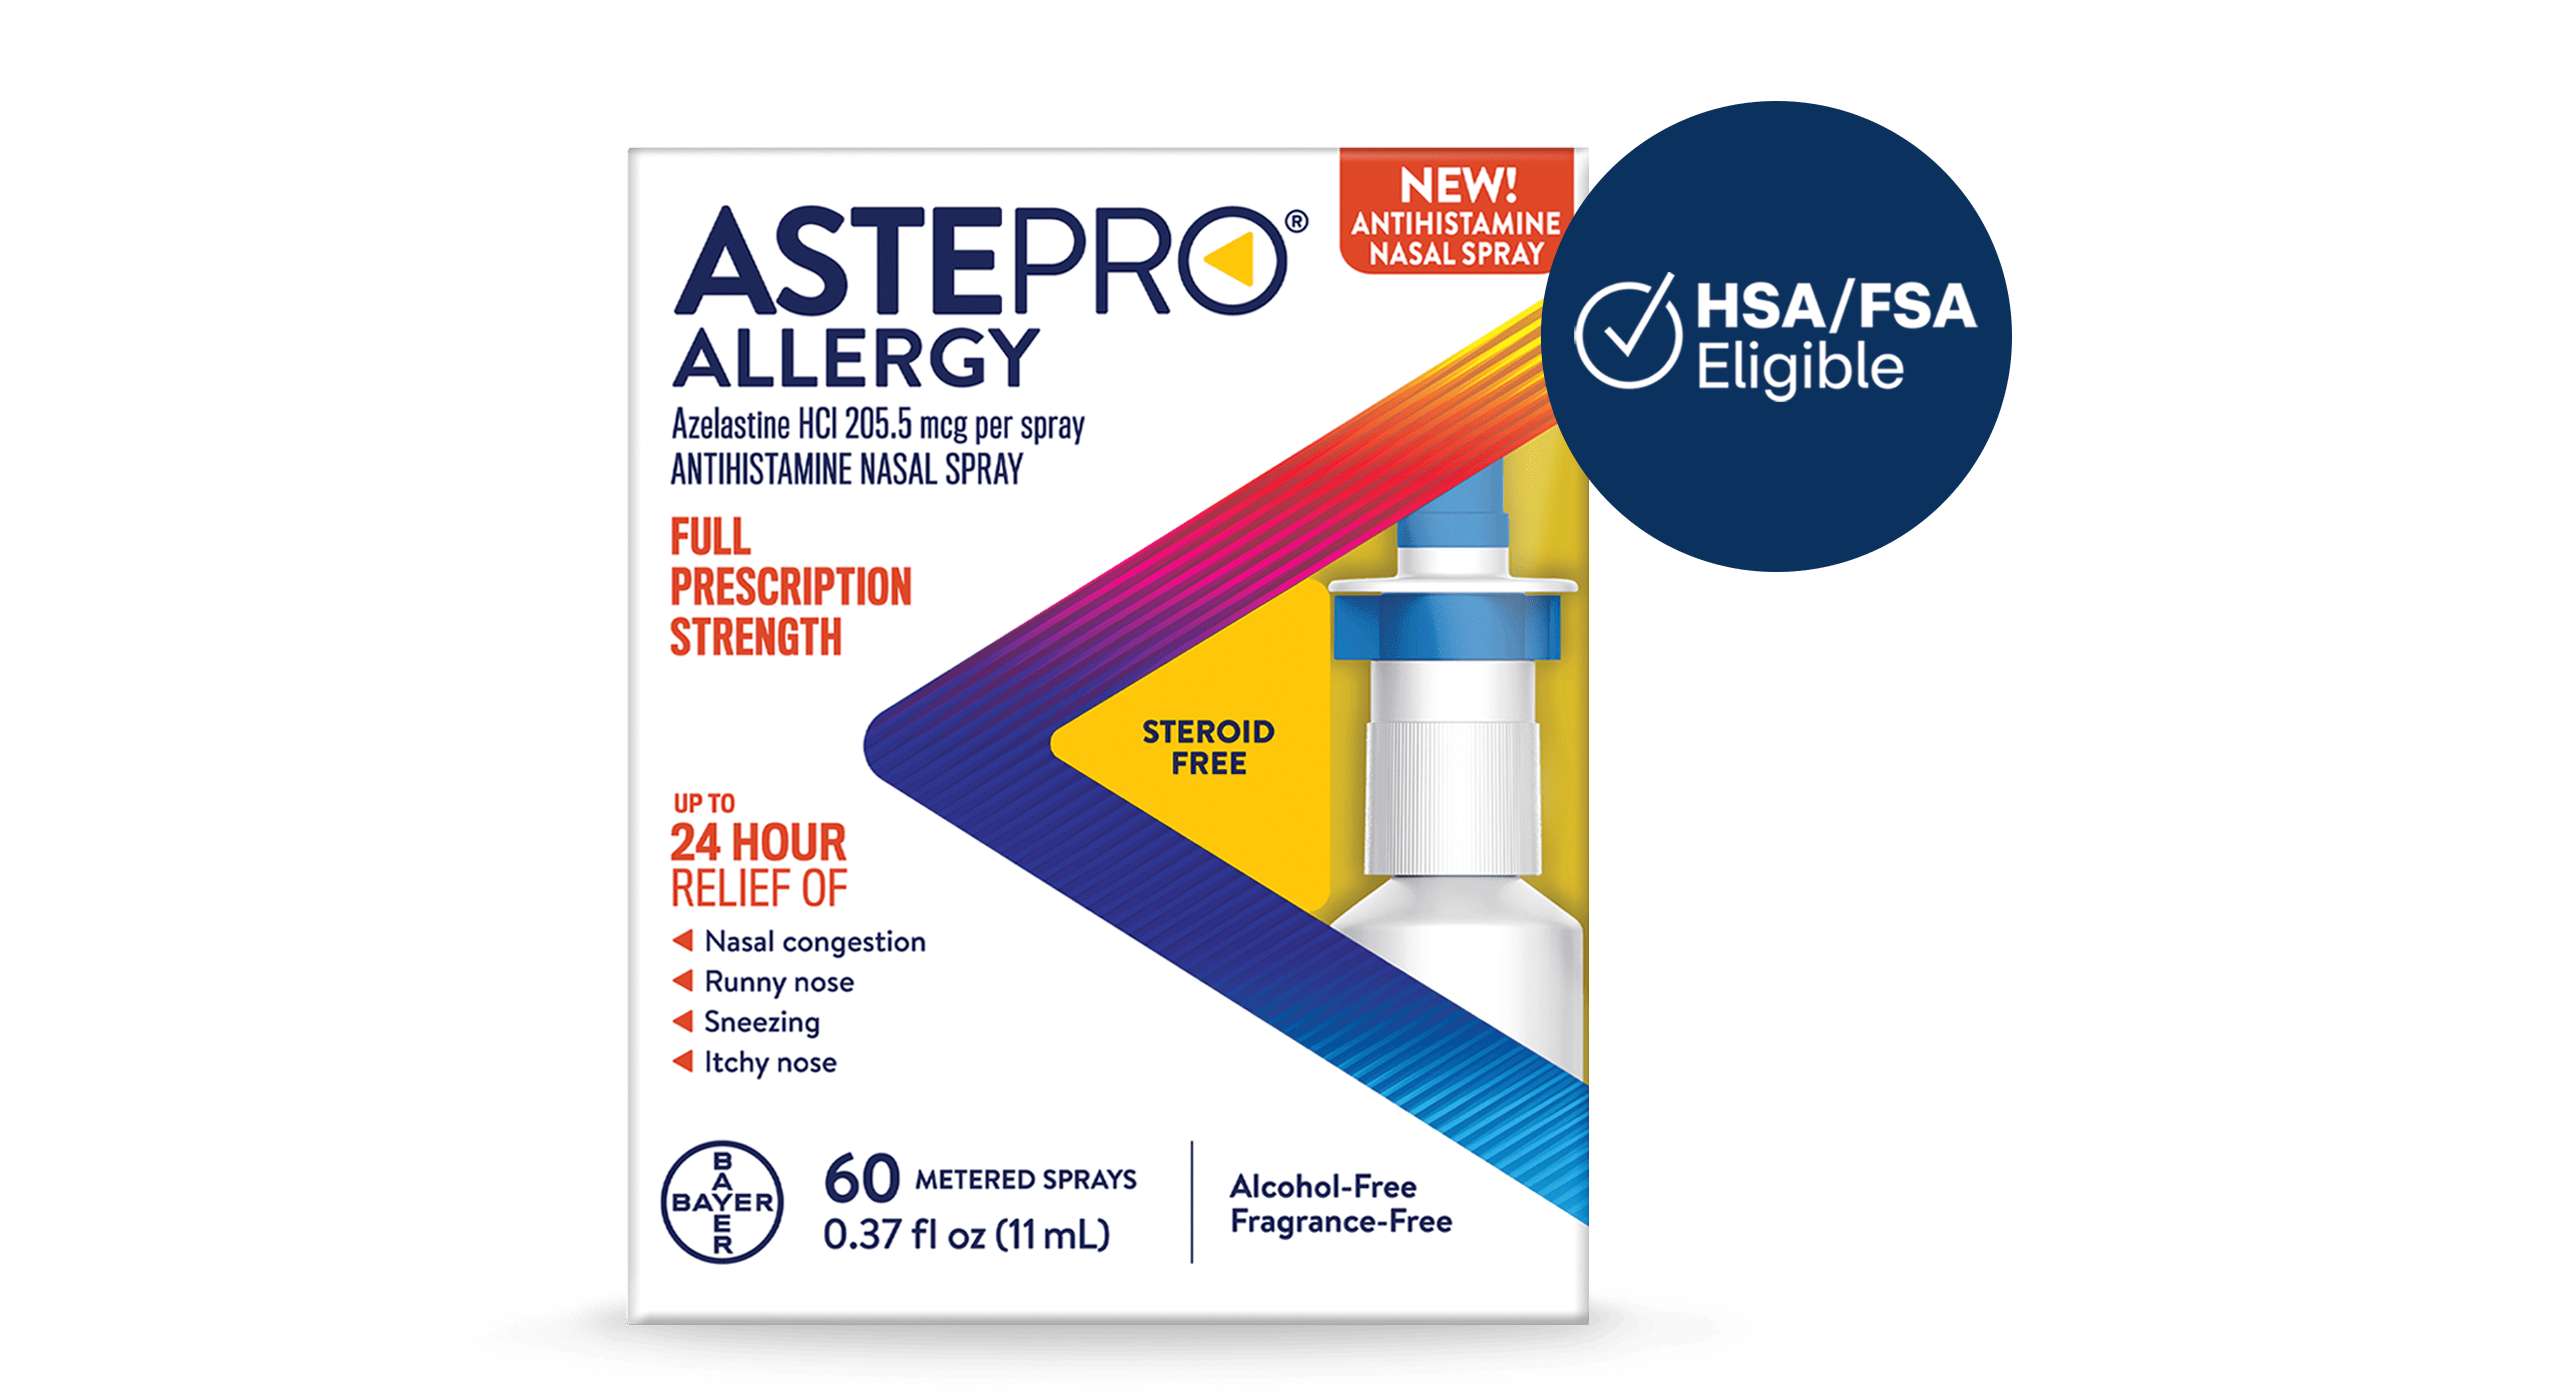 Astepro allergy relief products, HSA/FSA eligible logo